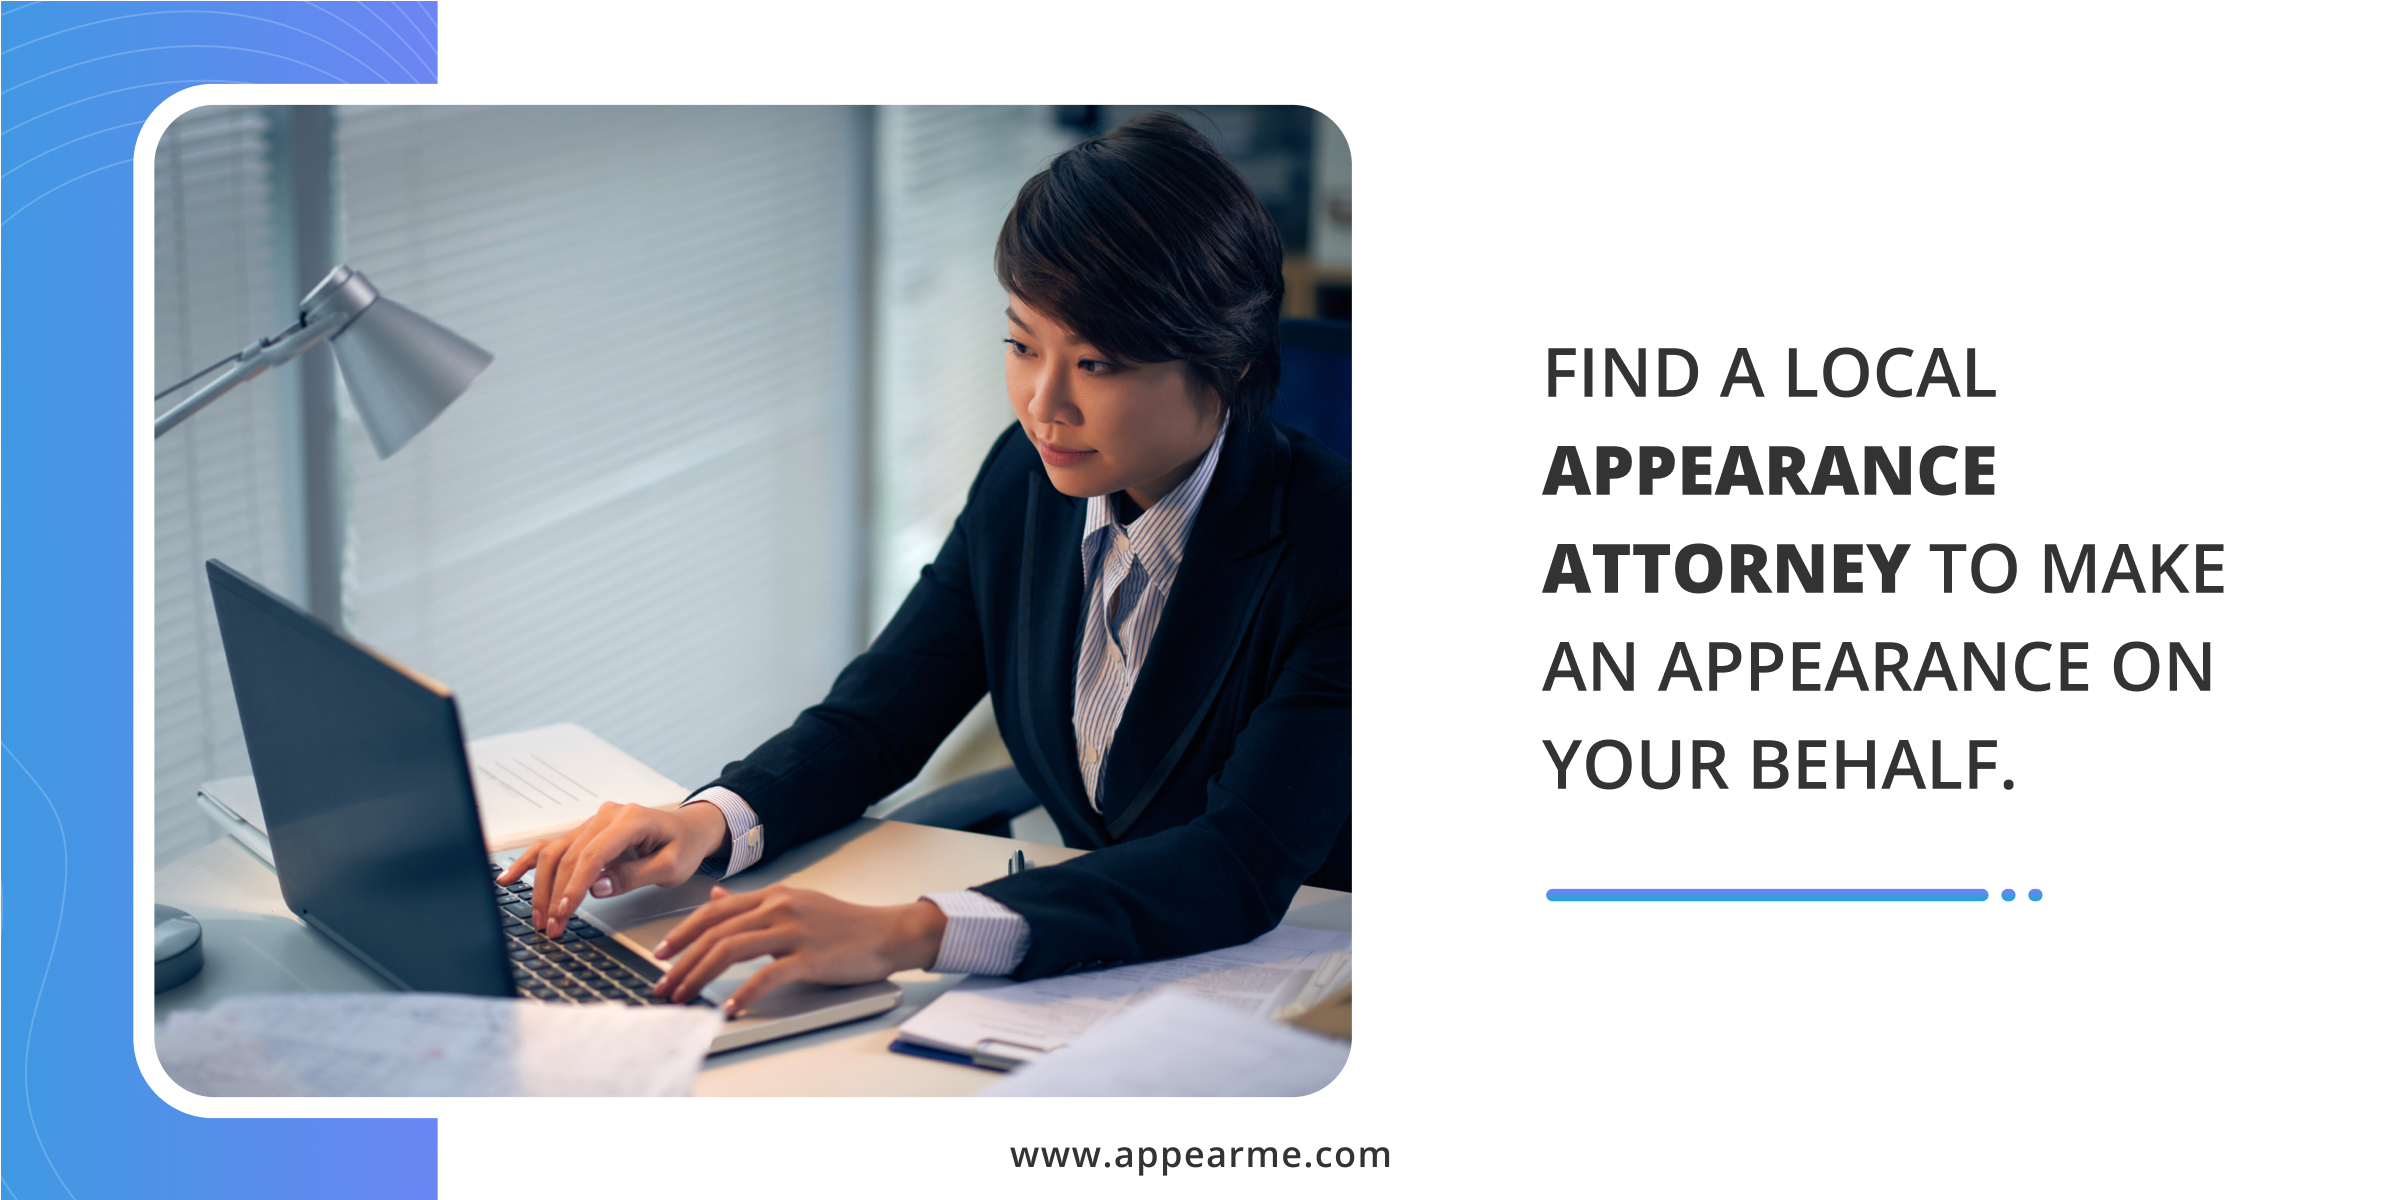 Find a Local Appearance Attorney to Make an Appearance on Your Behalf